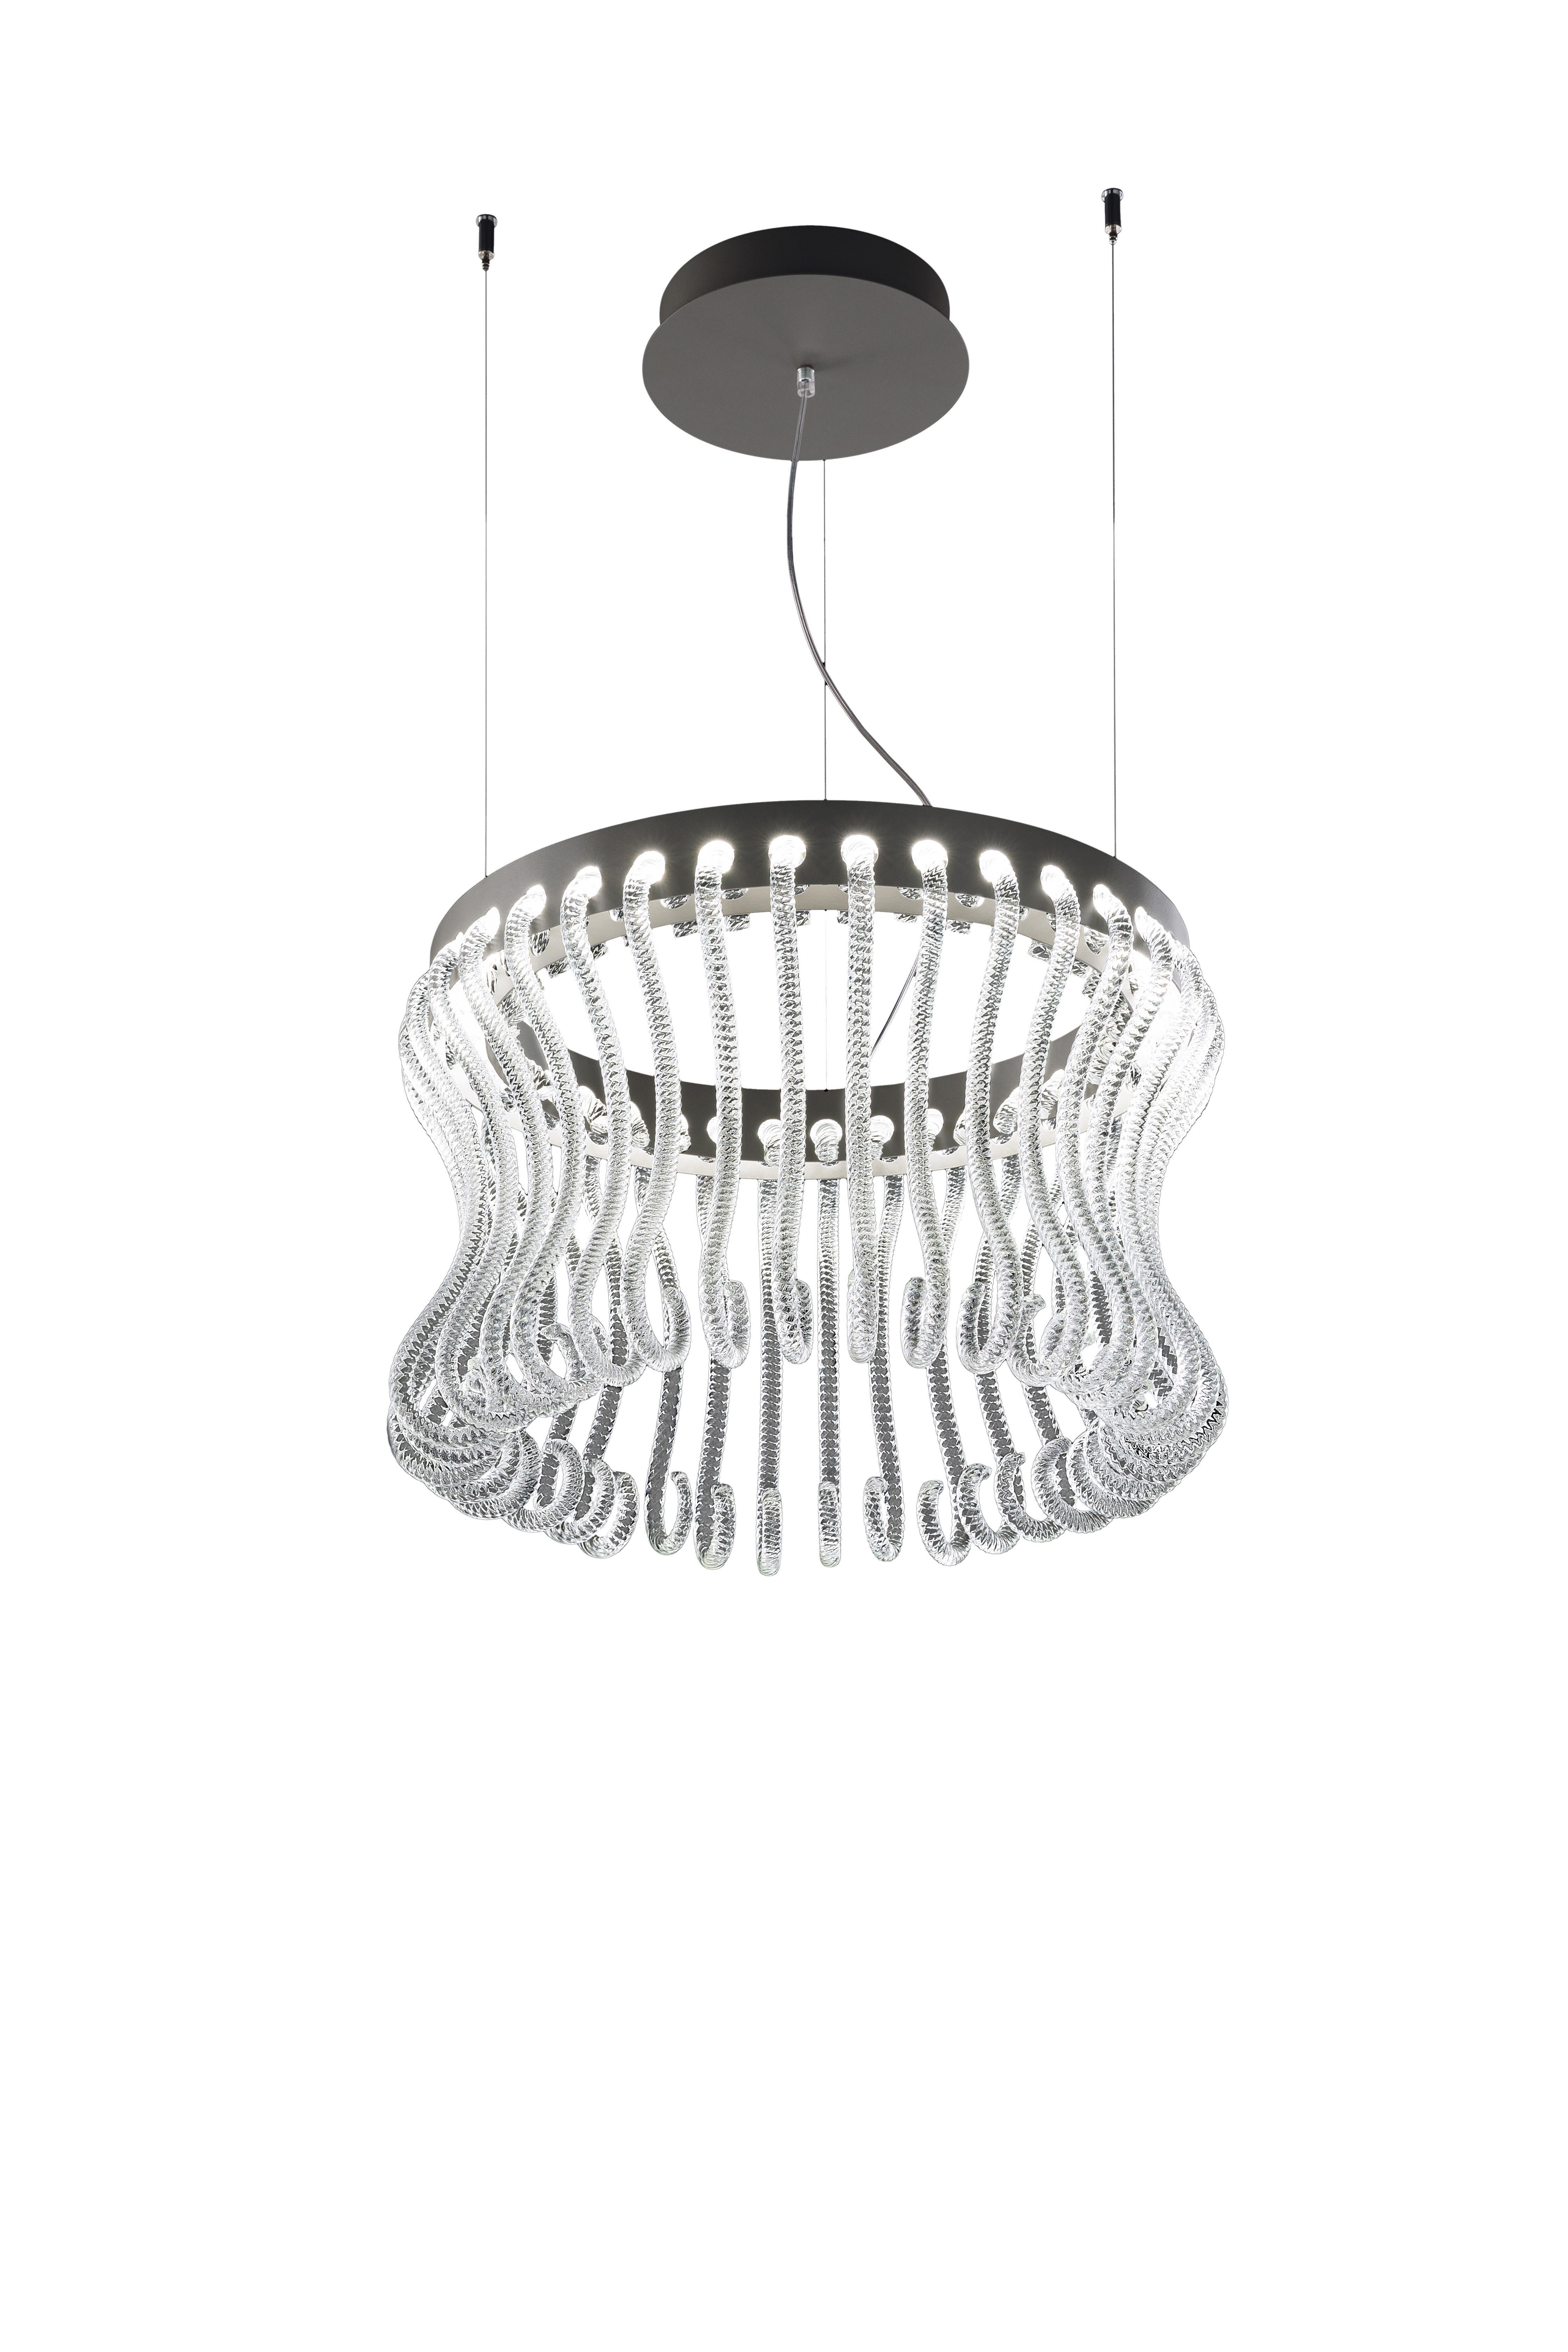 Originally designed in 2017 by Brian Rasmussen, here you are shown the Crown 7334 Suspension Lamp in Crystal Glass and Painted Grey Finish. The pastoral is a full-glass decorative element, characteristic of the Venetian chandelier which has become